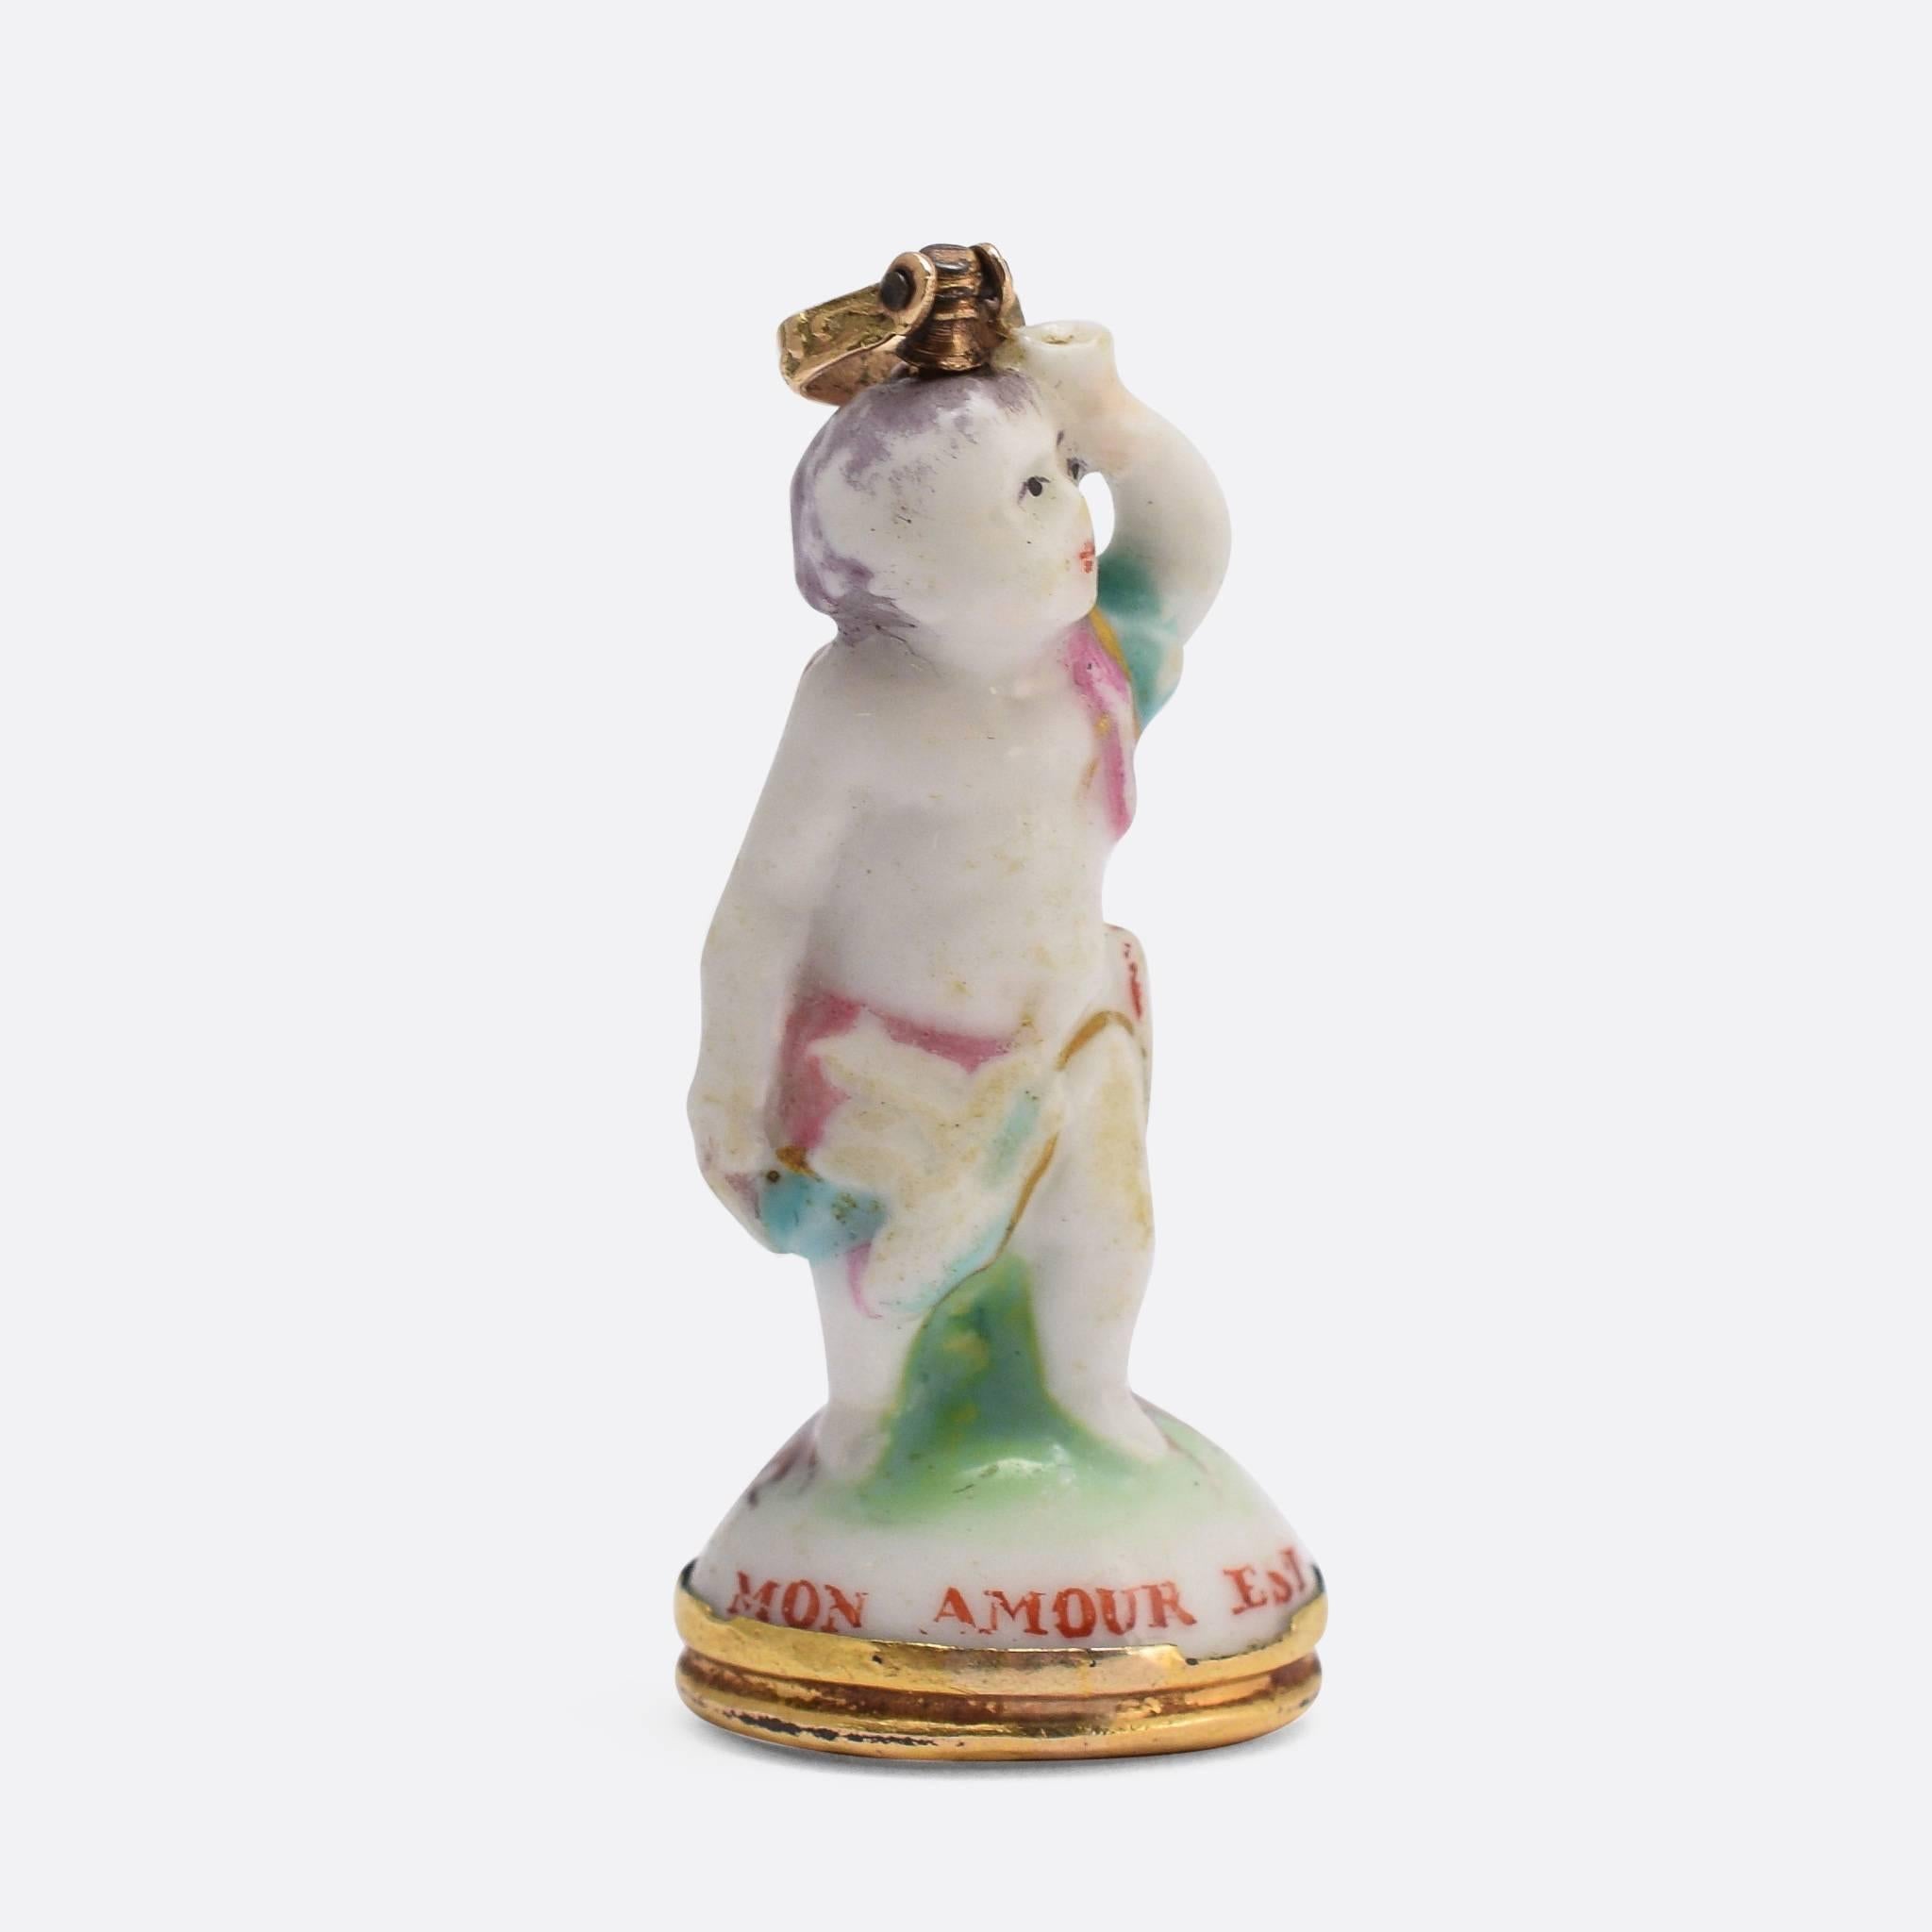 An original 18th Century porcelain Derby Chelsea period fob seal. This particular piece features Cupid on a tree-stump holding a cup, and displays the pale colouring typical of the Chelsea factory. The original gold bail and seal base are both